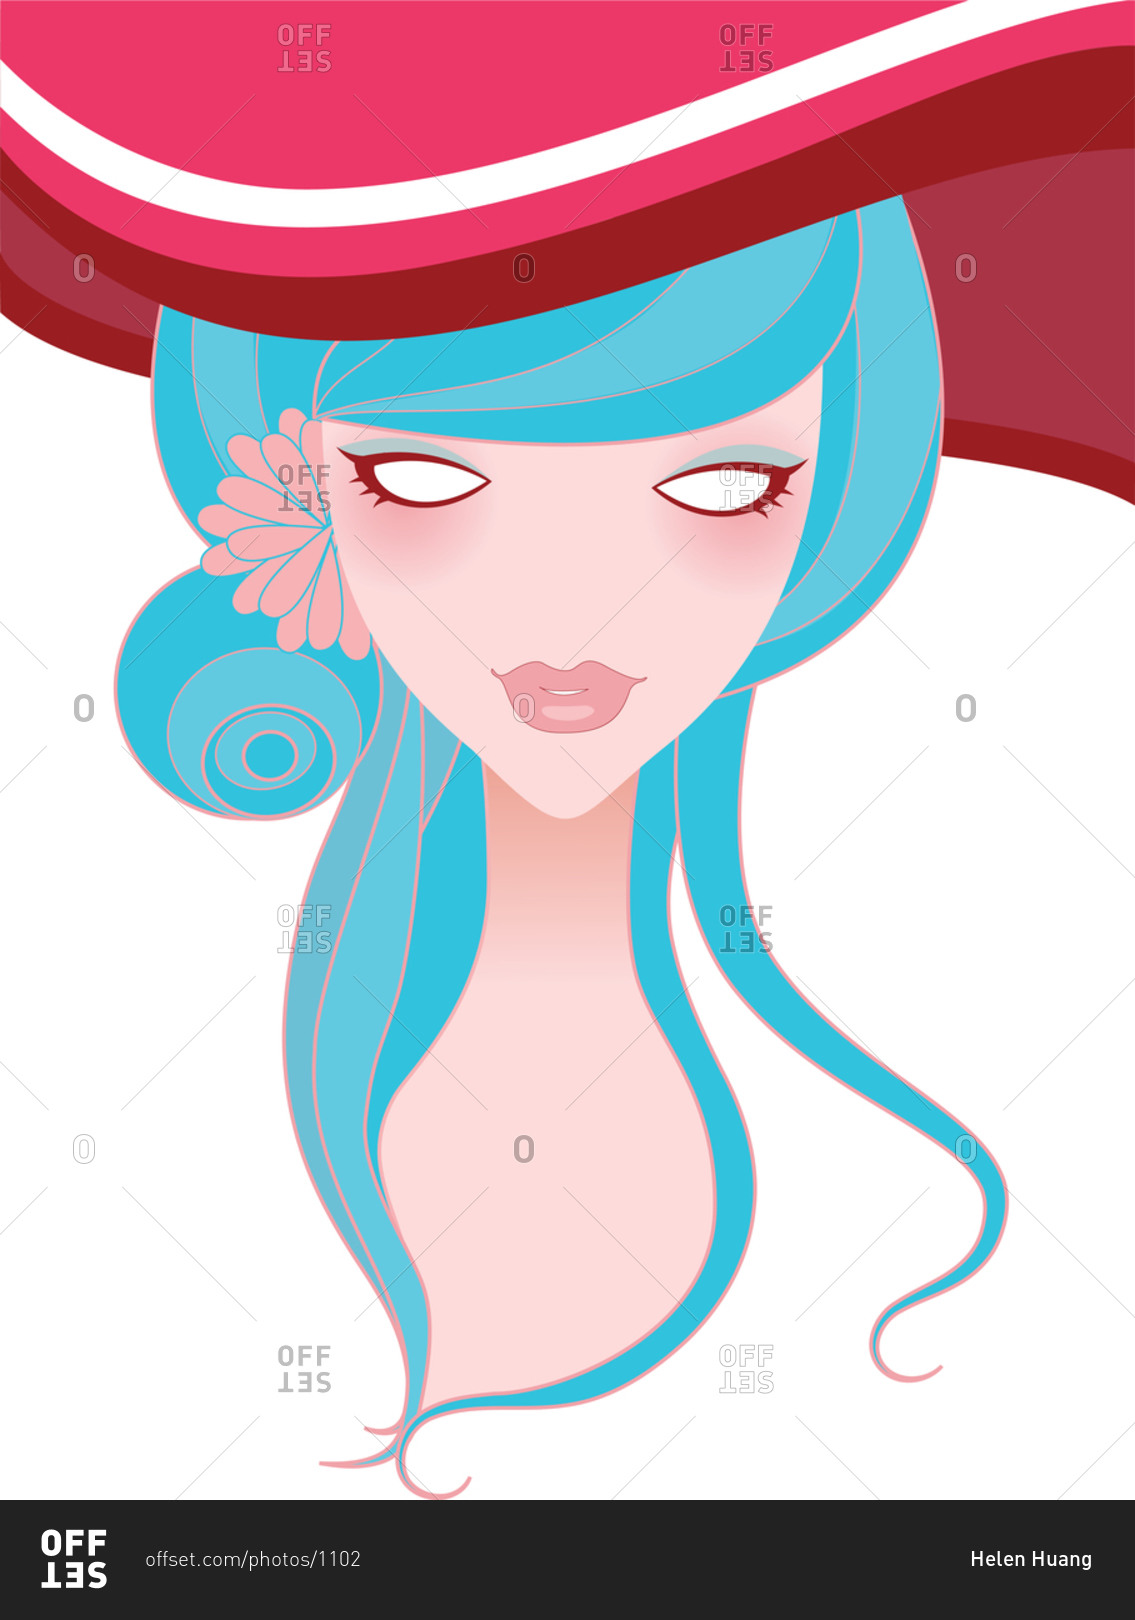 A fashionable young woman with light blue hair and a stylish hat